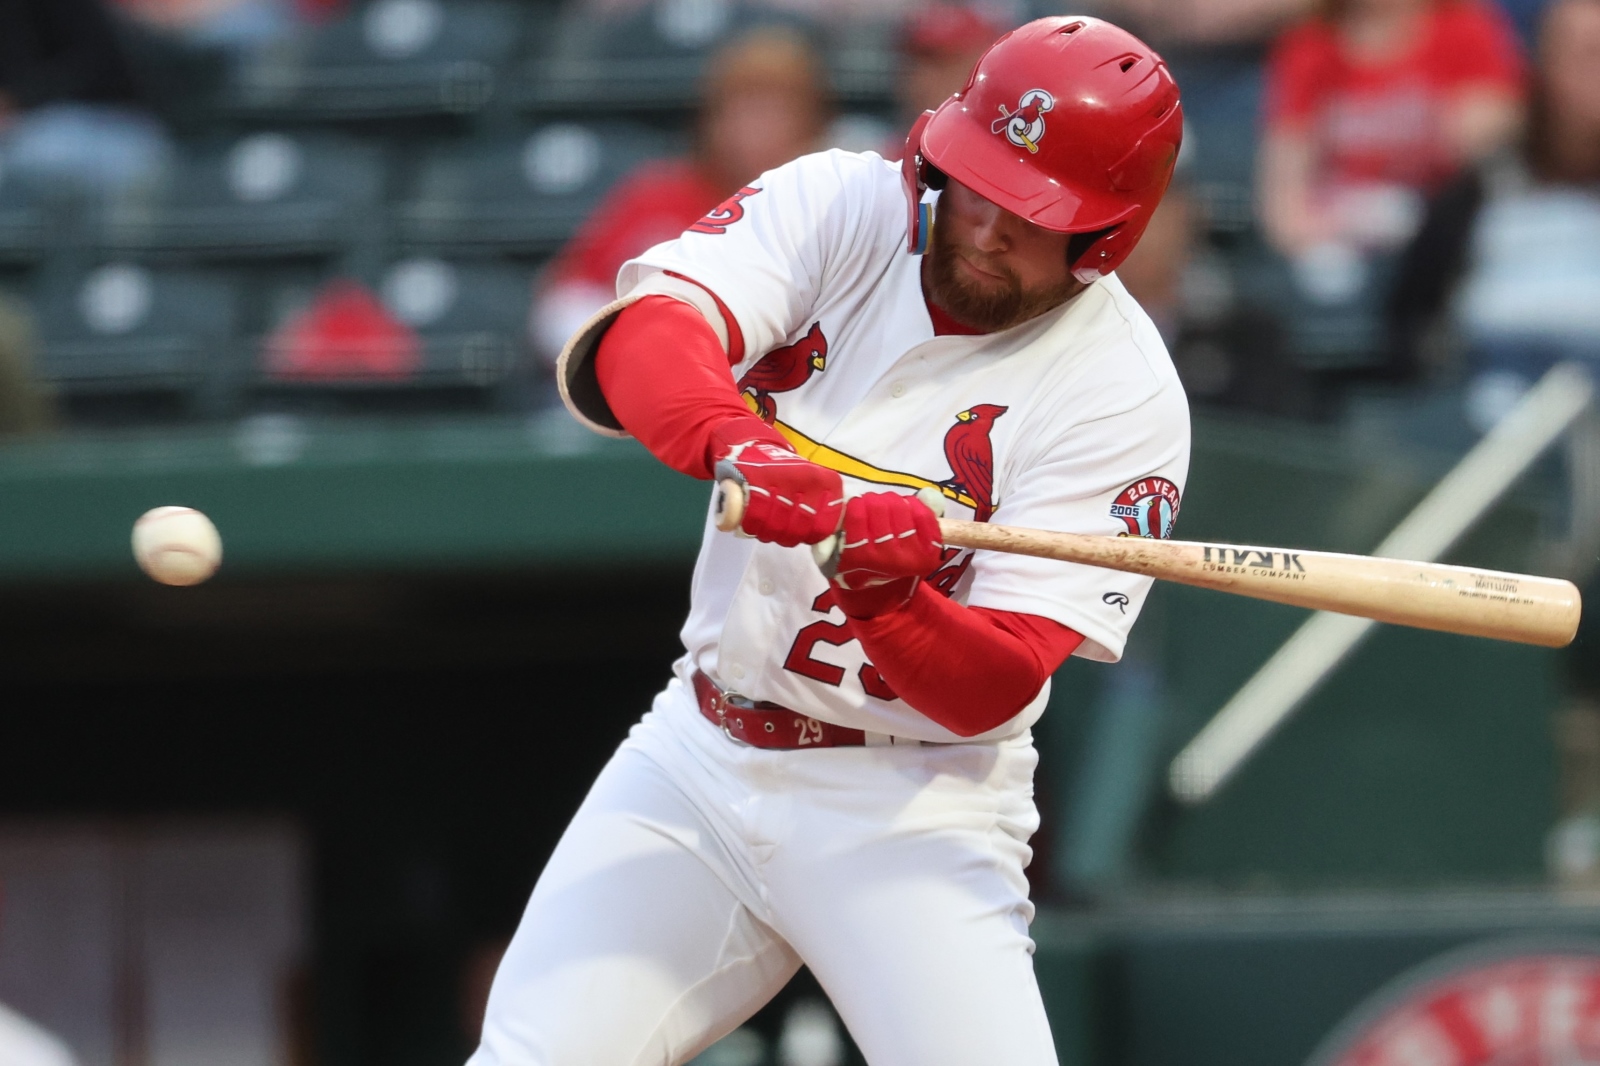 Matt Lloyd has overcome a lost 2020 season due to COVID-19 and injuries, leading to his release by the Cincinnati Reds, to having a productive first season with the Springfield Cardinals. (Photo by PJ Maigi, Springfield Cardinals)